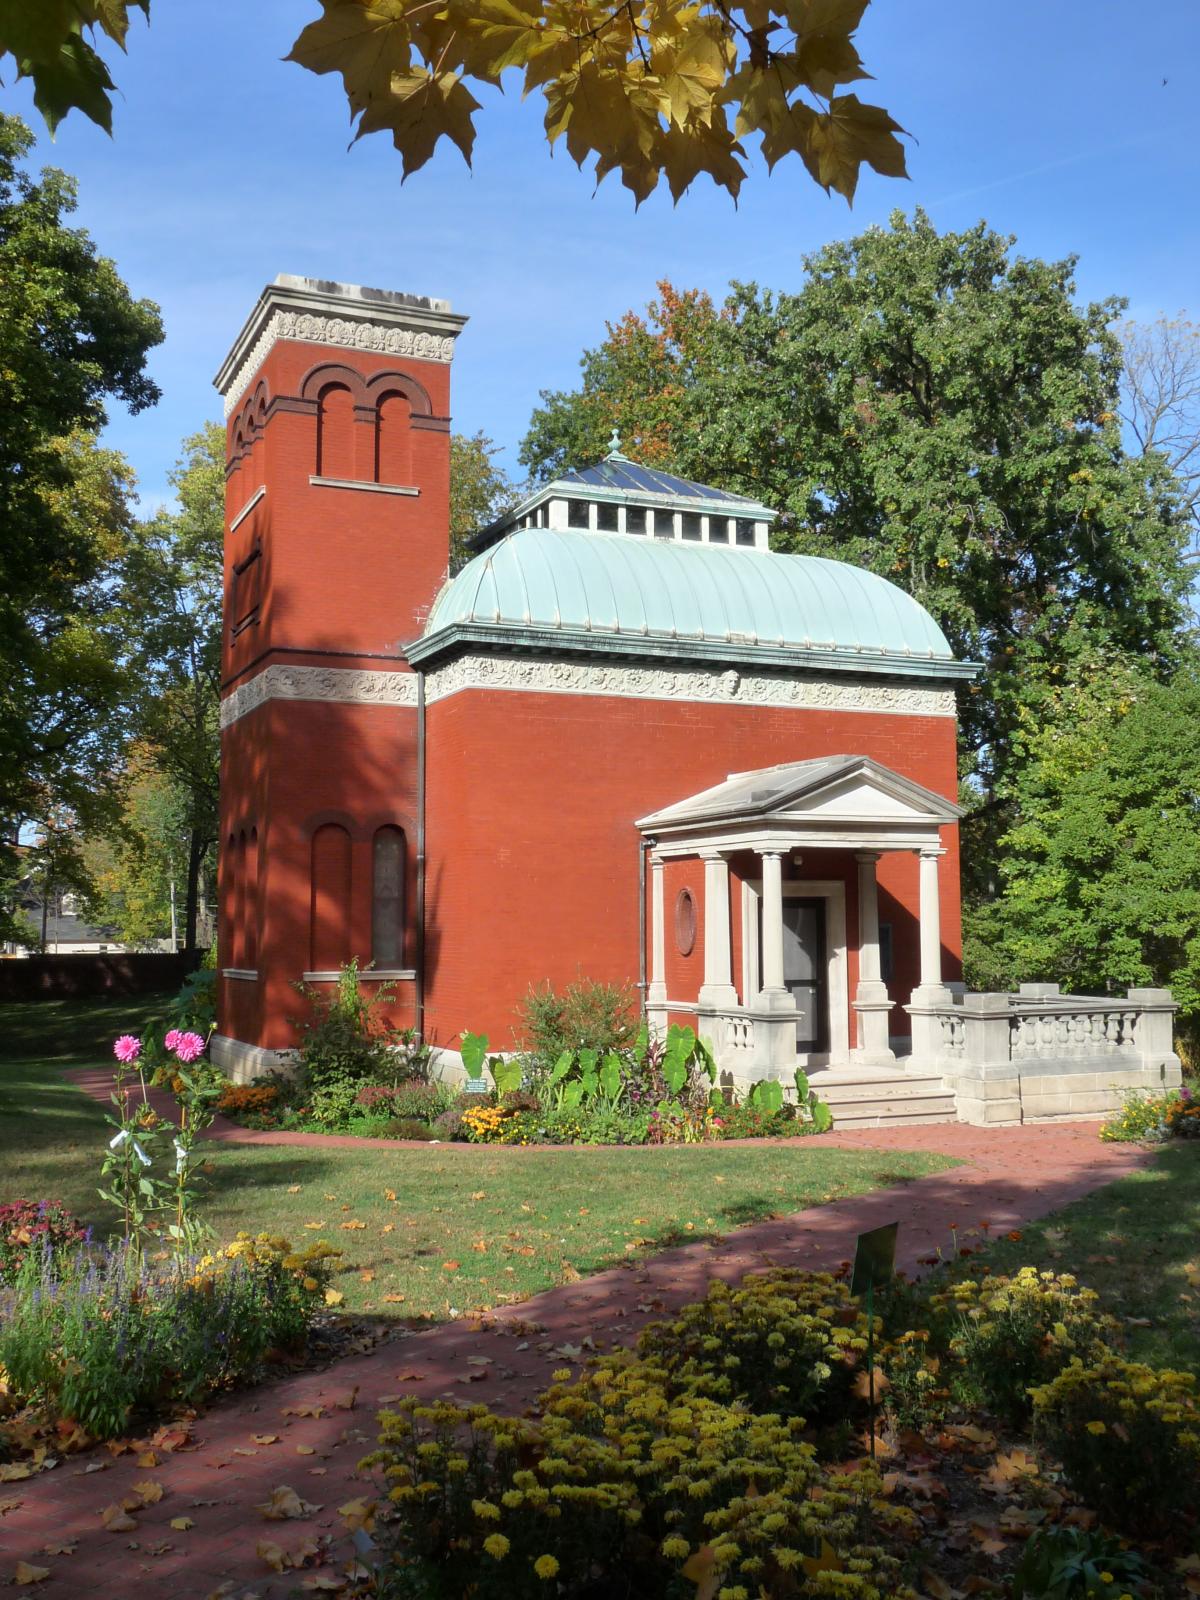 Red brick building with a teal roof and white porch columns, surrounded by green gardens and trees